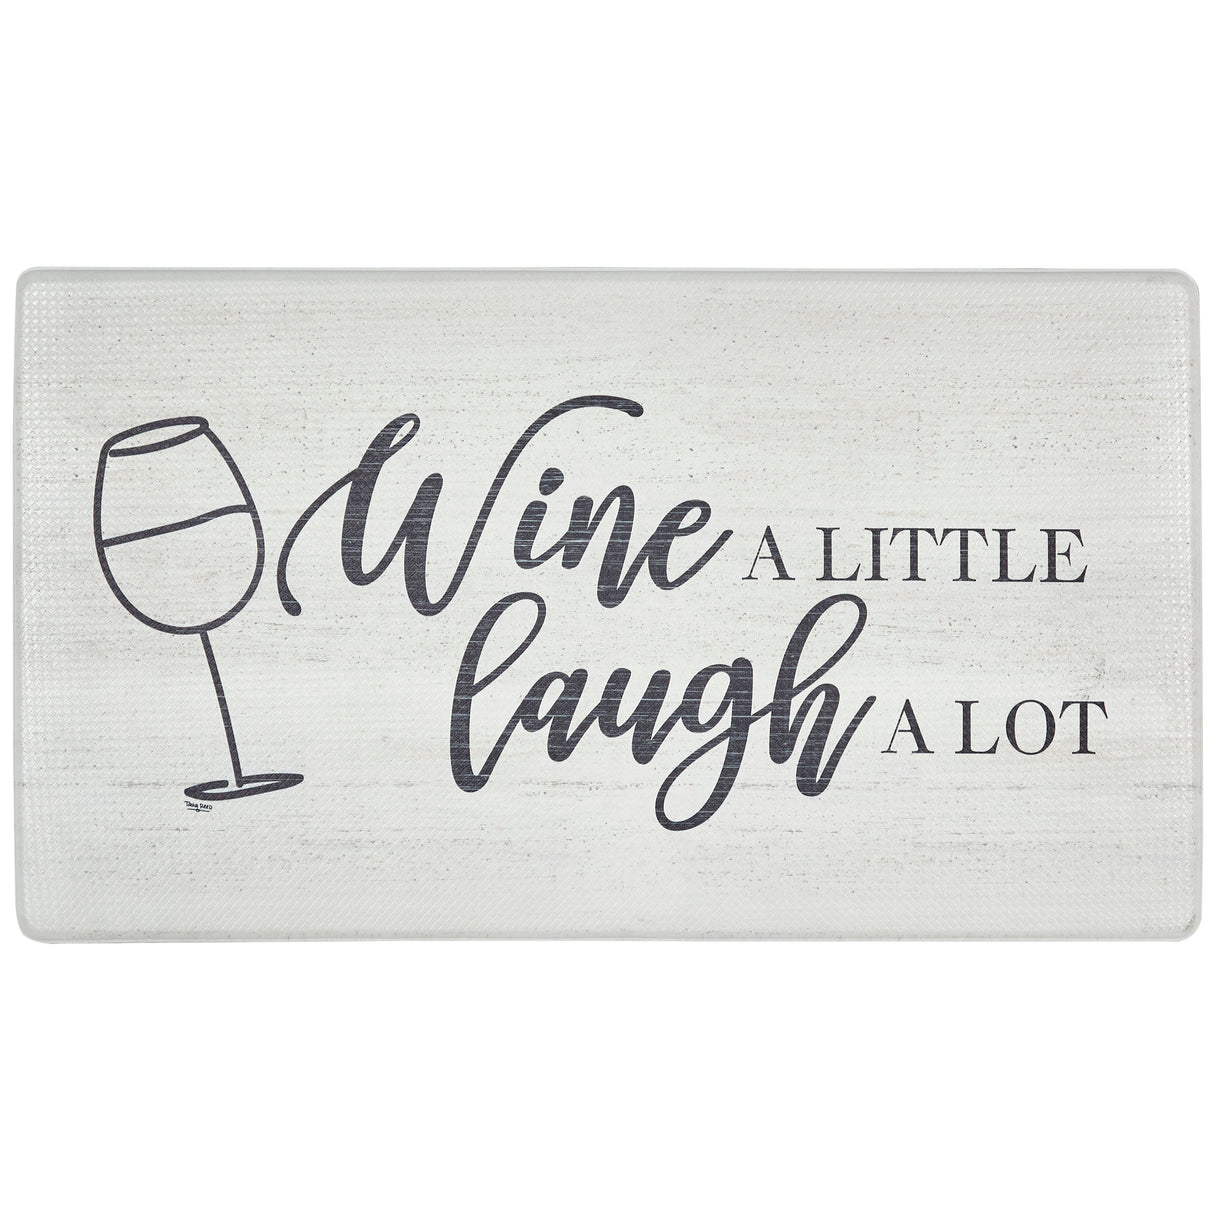 20"x36" Feel at Ease Anti-Fatigue Kitchen Mat (Wine a Little)